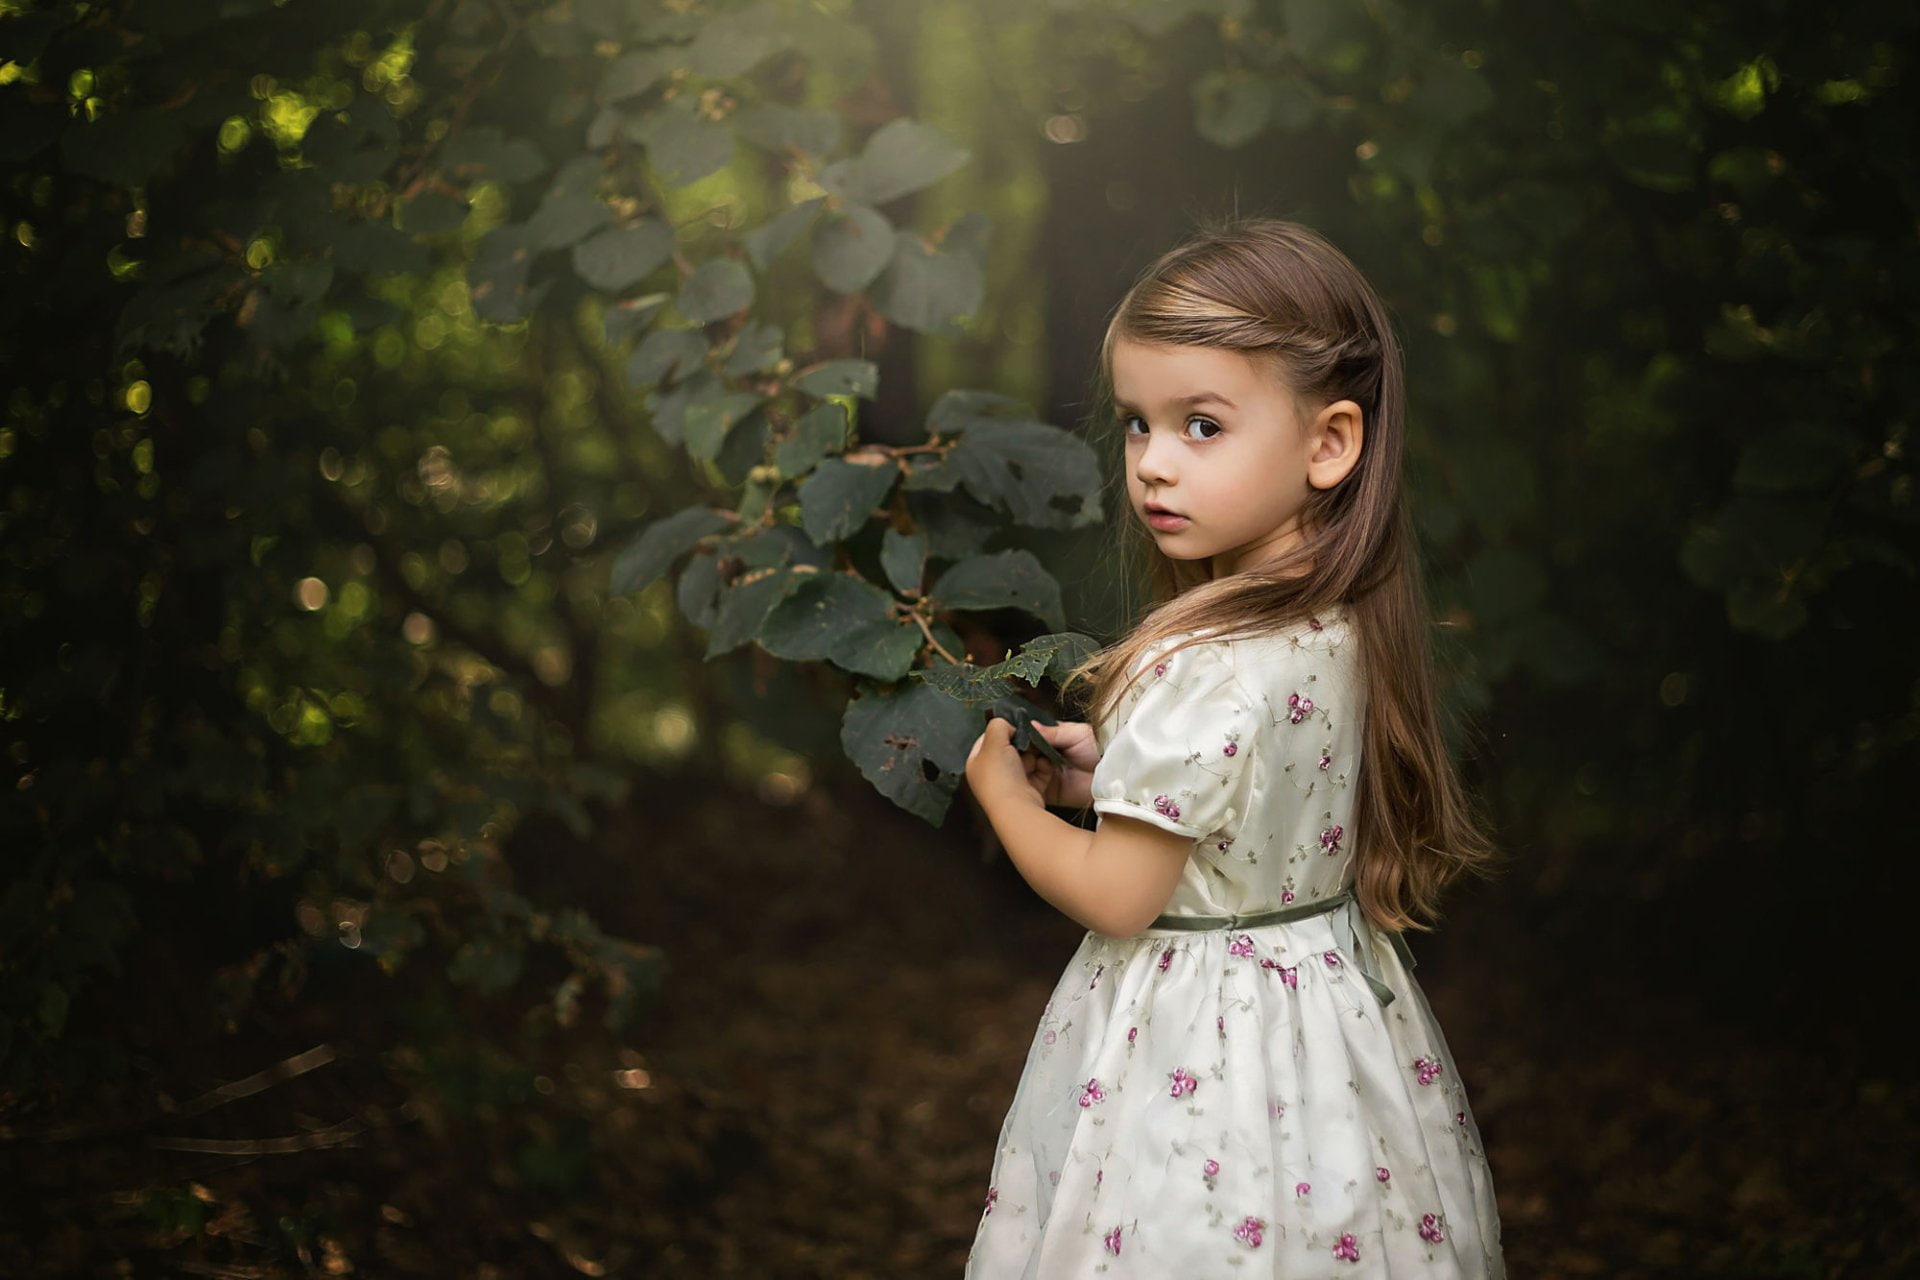 Photography, Child, Cute, Dress, Forest, Little Girl, Tree